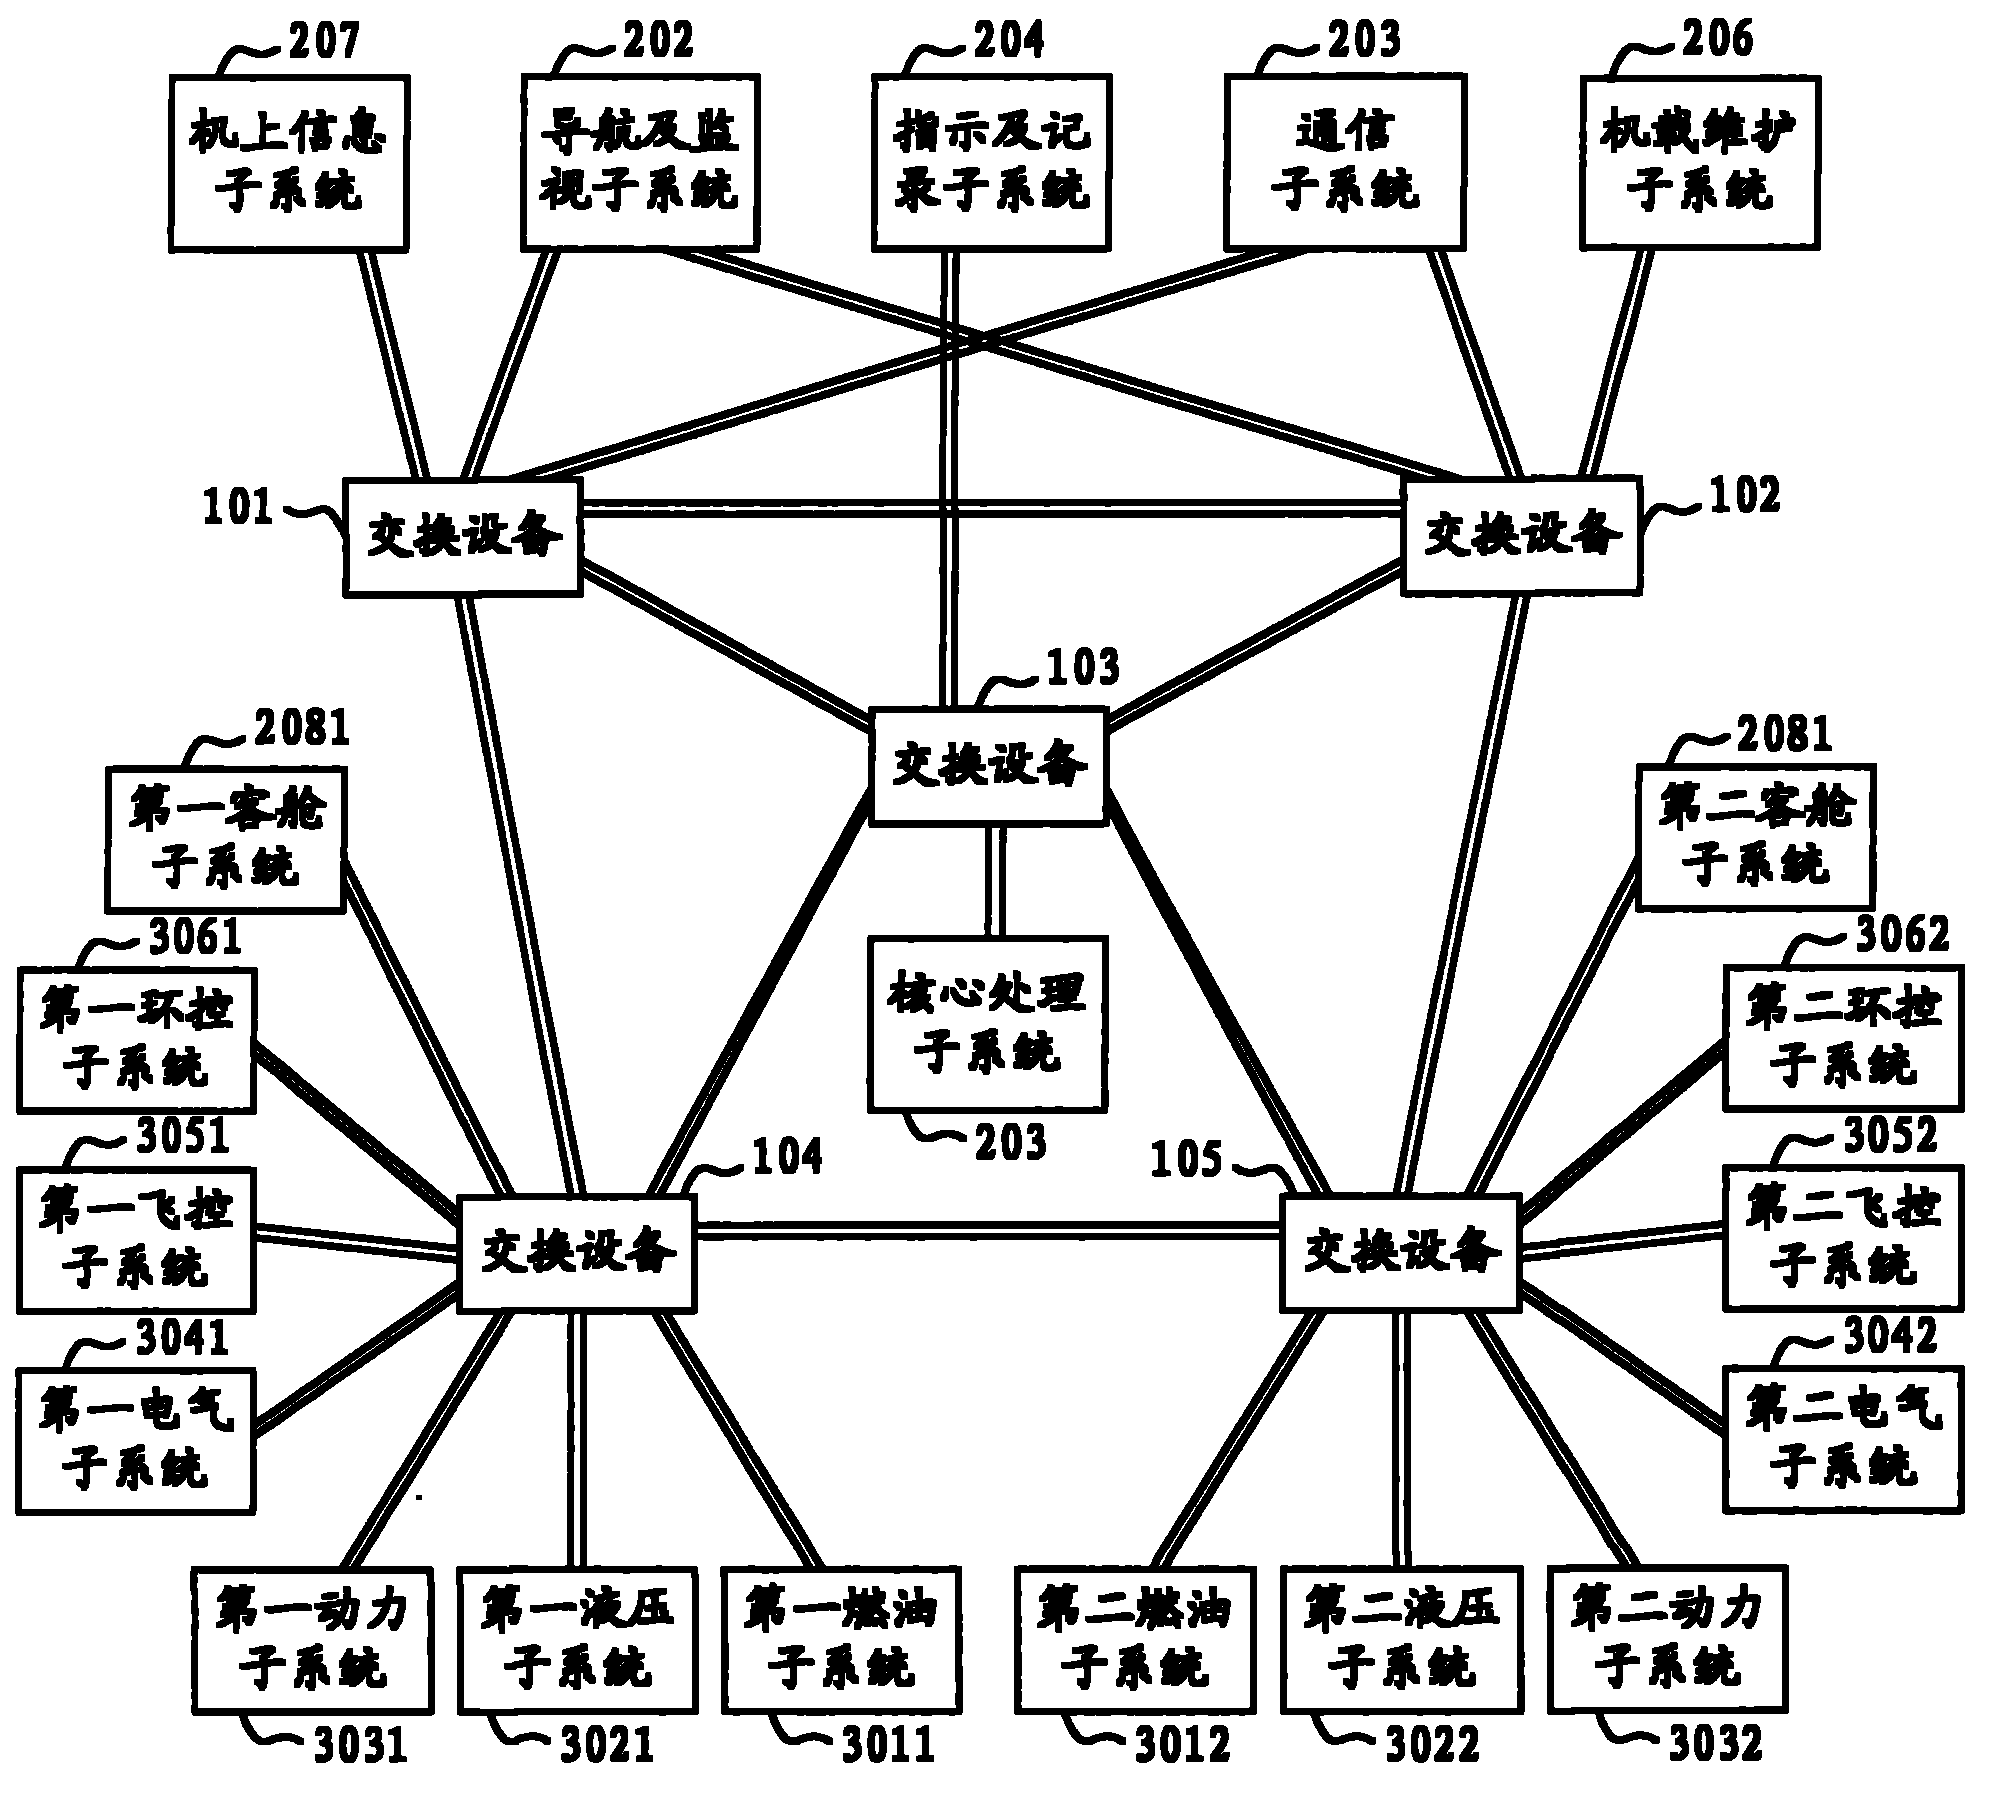 Communication network for aircraft